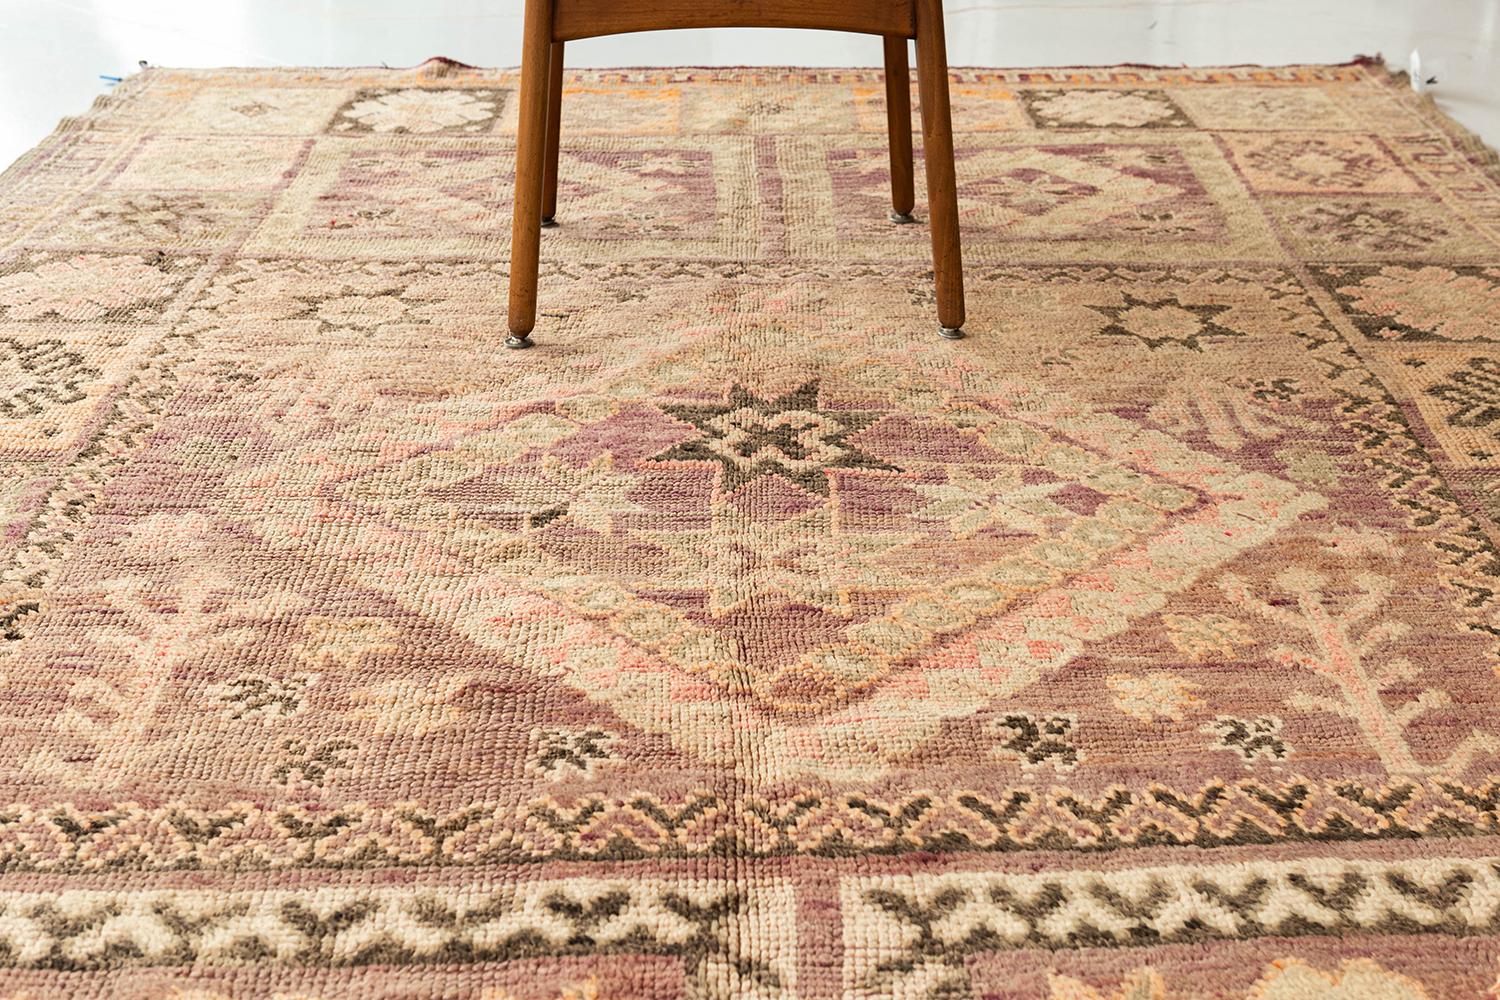 A unique and charming antique tribal rug from the High Atlas Mountains of Morocco. This beautiful piece has rich colors and is designed with symbolic diamonds and geometric shapes commonly found in High Atlas tribal rugs. This piece will bring an